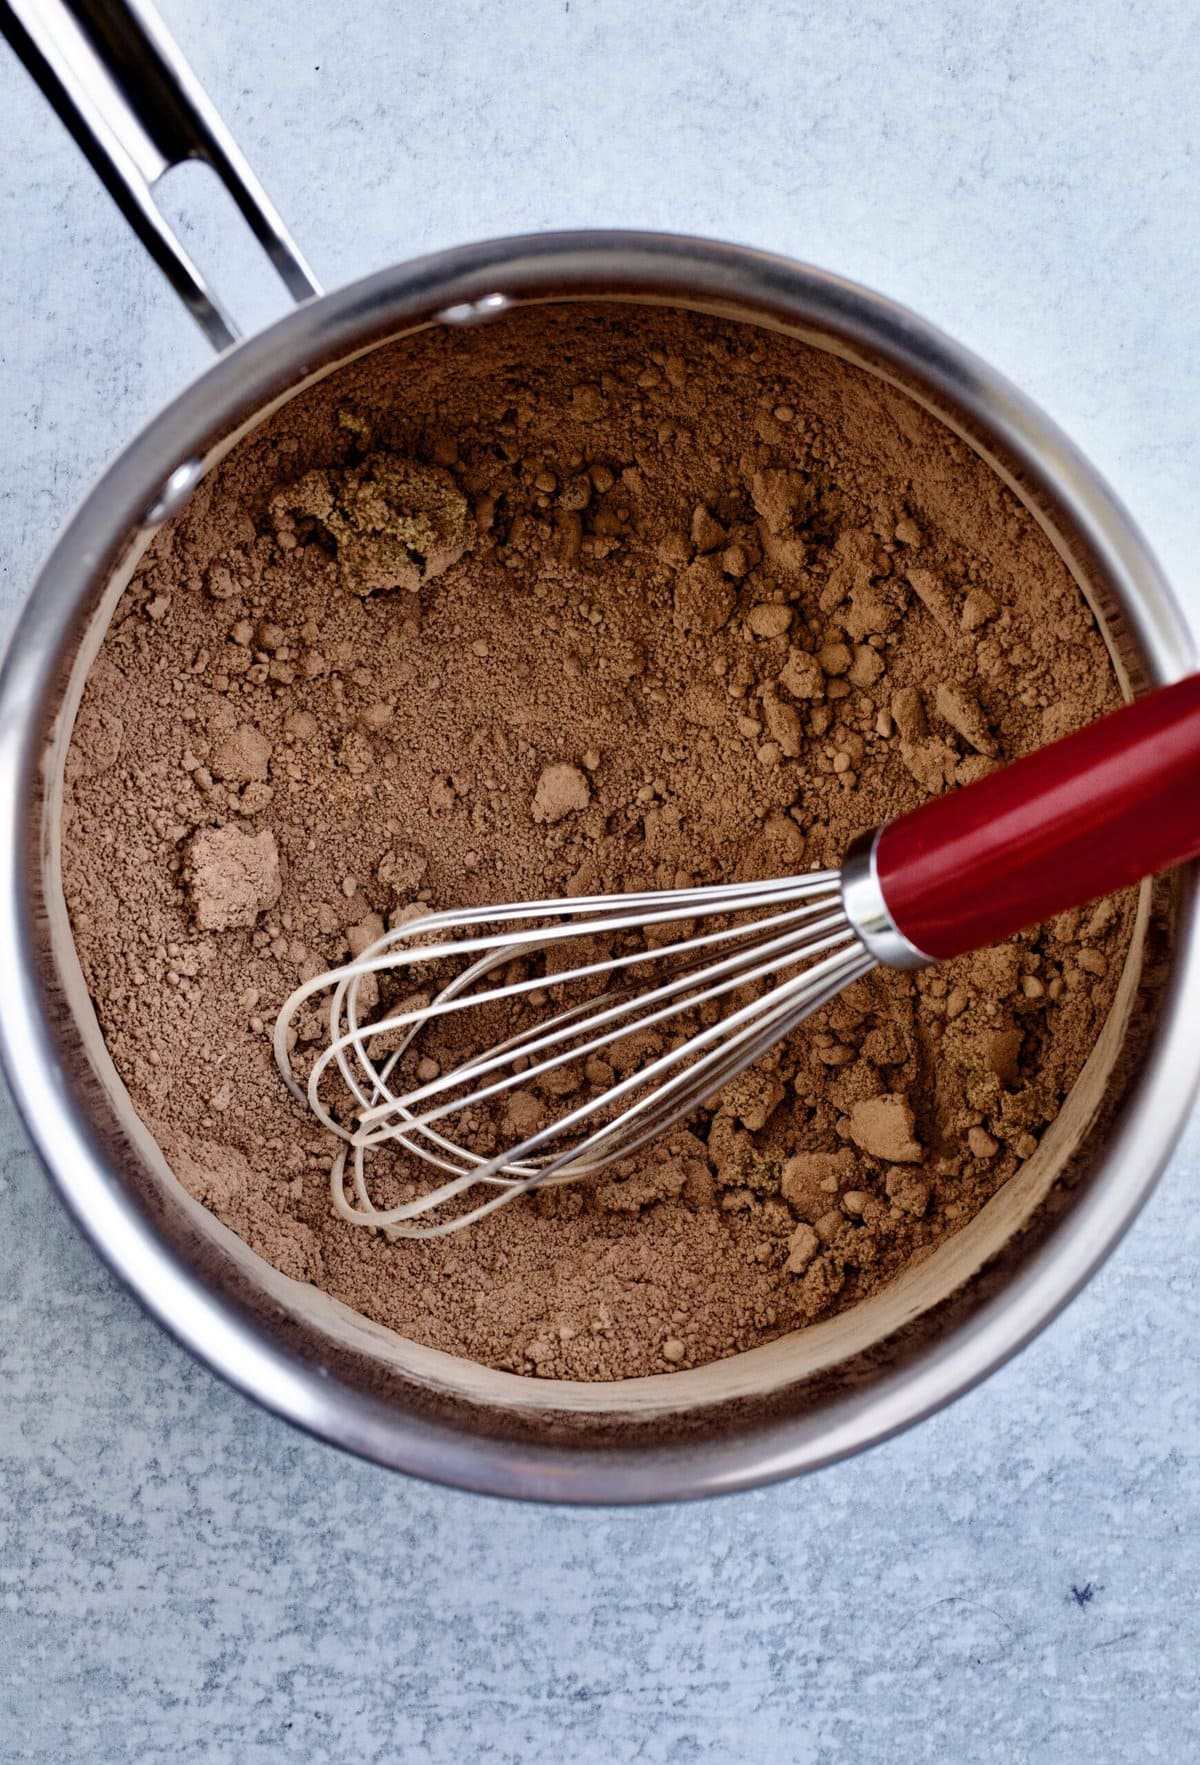 how to make- mixing ingredients in saucepan with whisk.